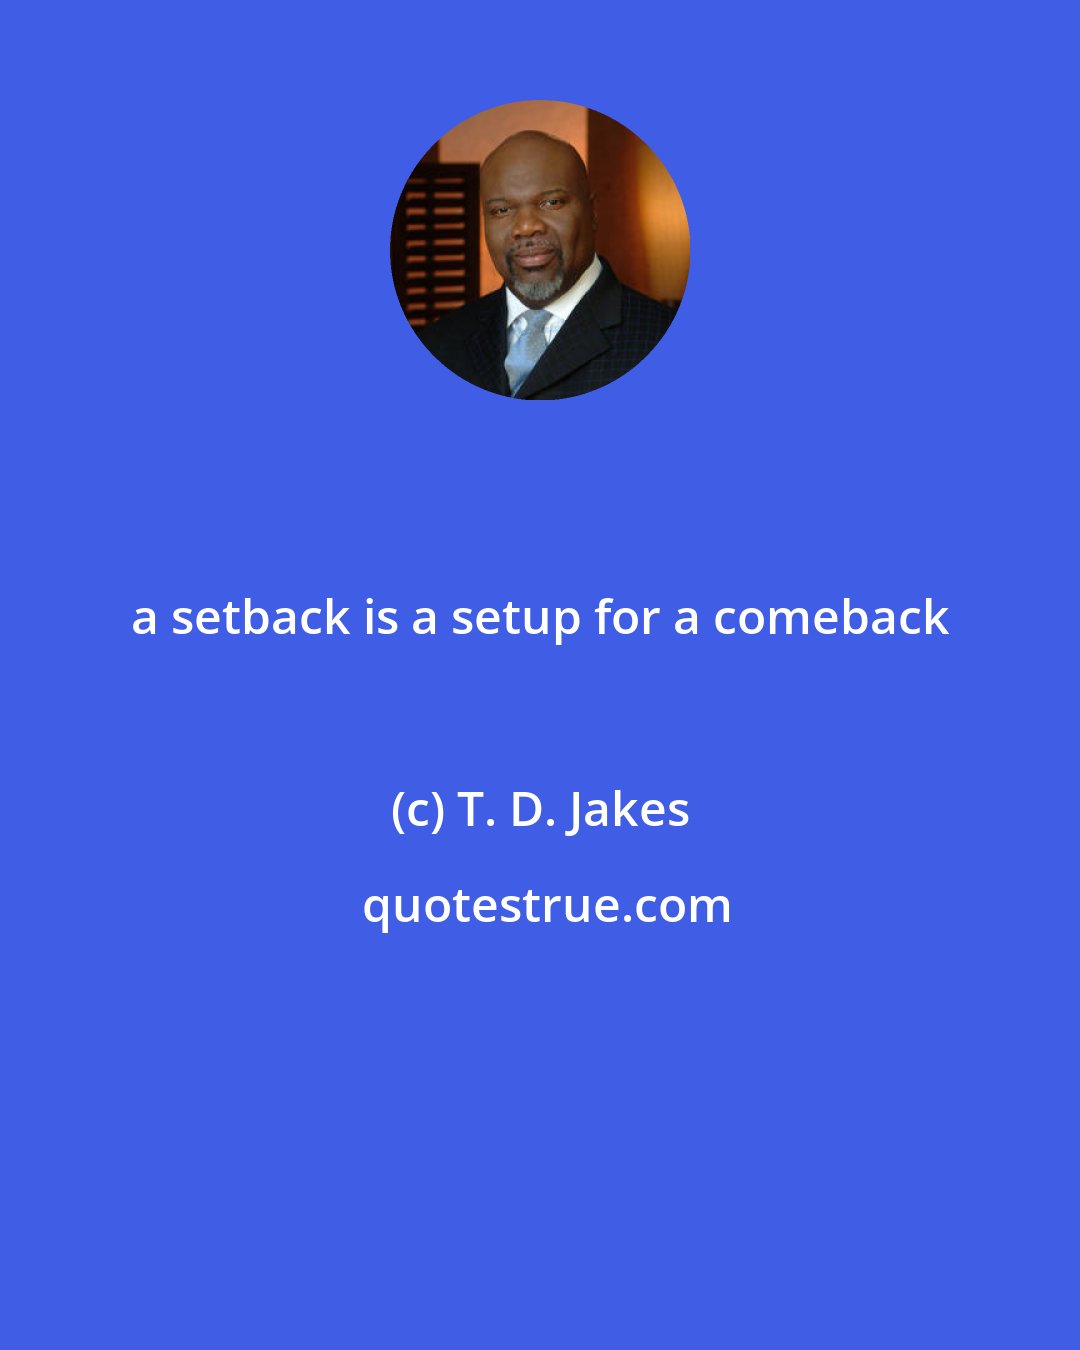 T. D. Jakes: a setback is a setup for a comeback